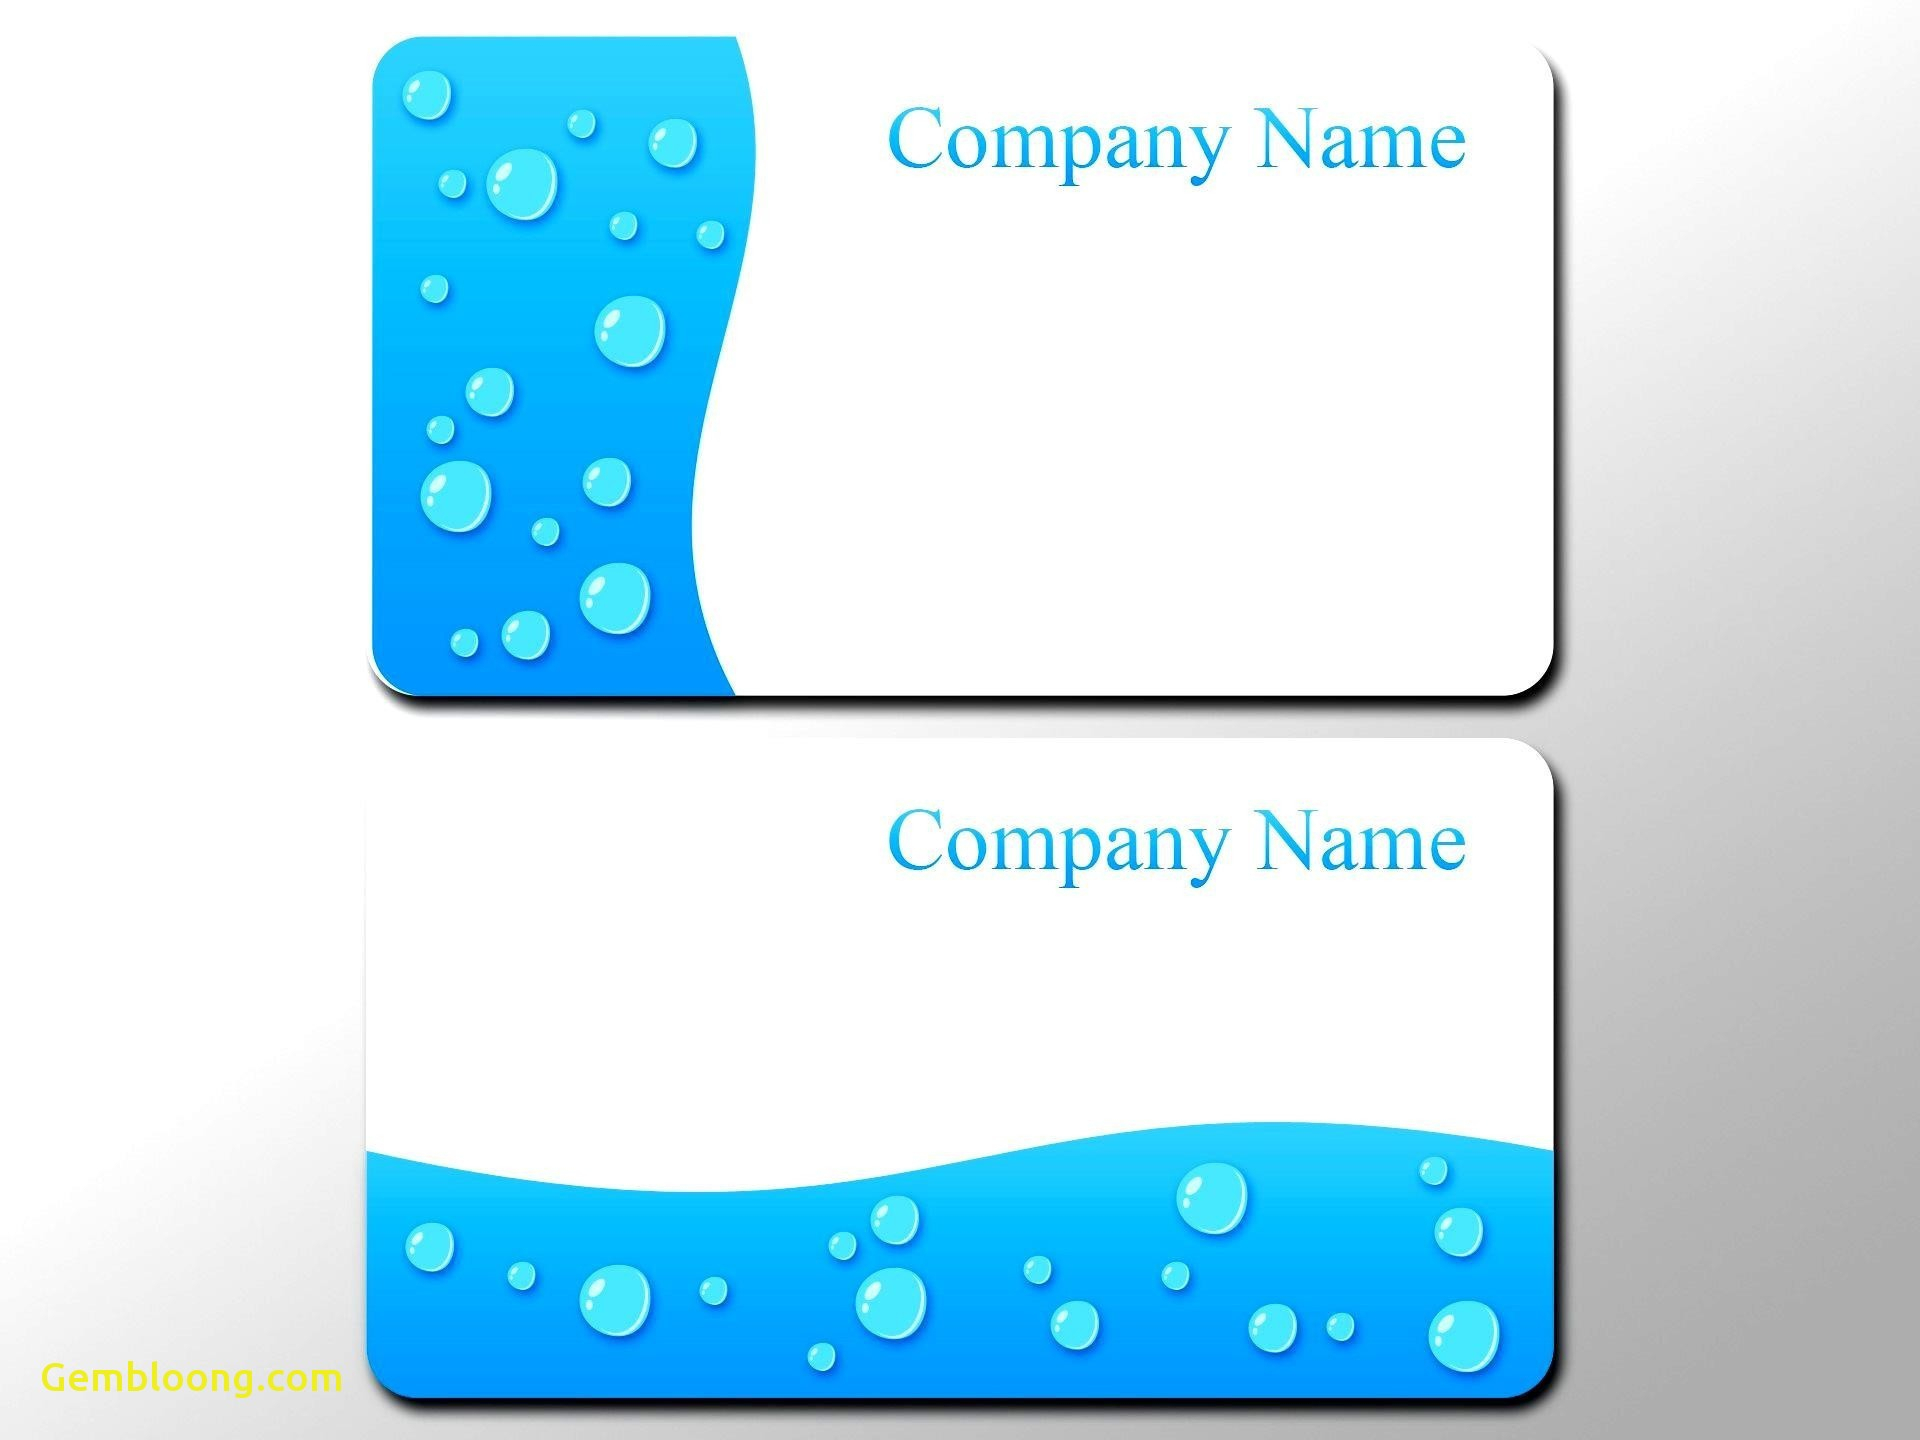 Business Card Photoshop Template Psd Awesome 016 Business Pertaining To Blank Business Card Template Download